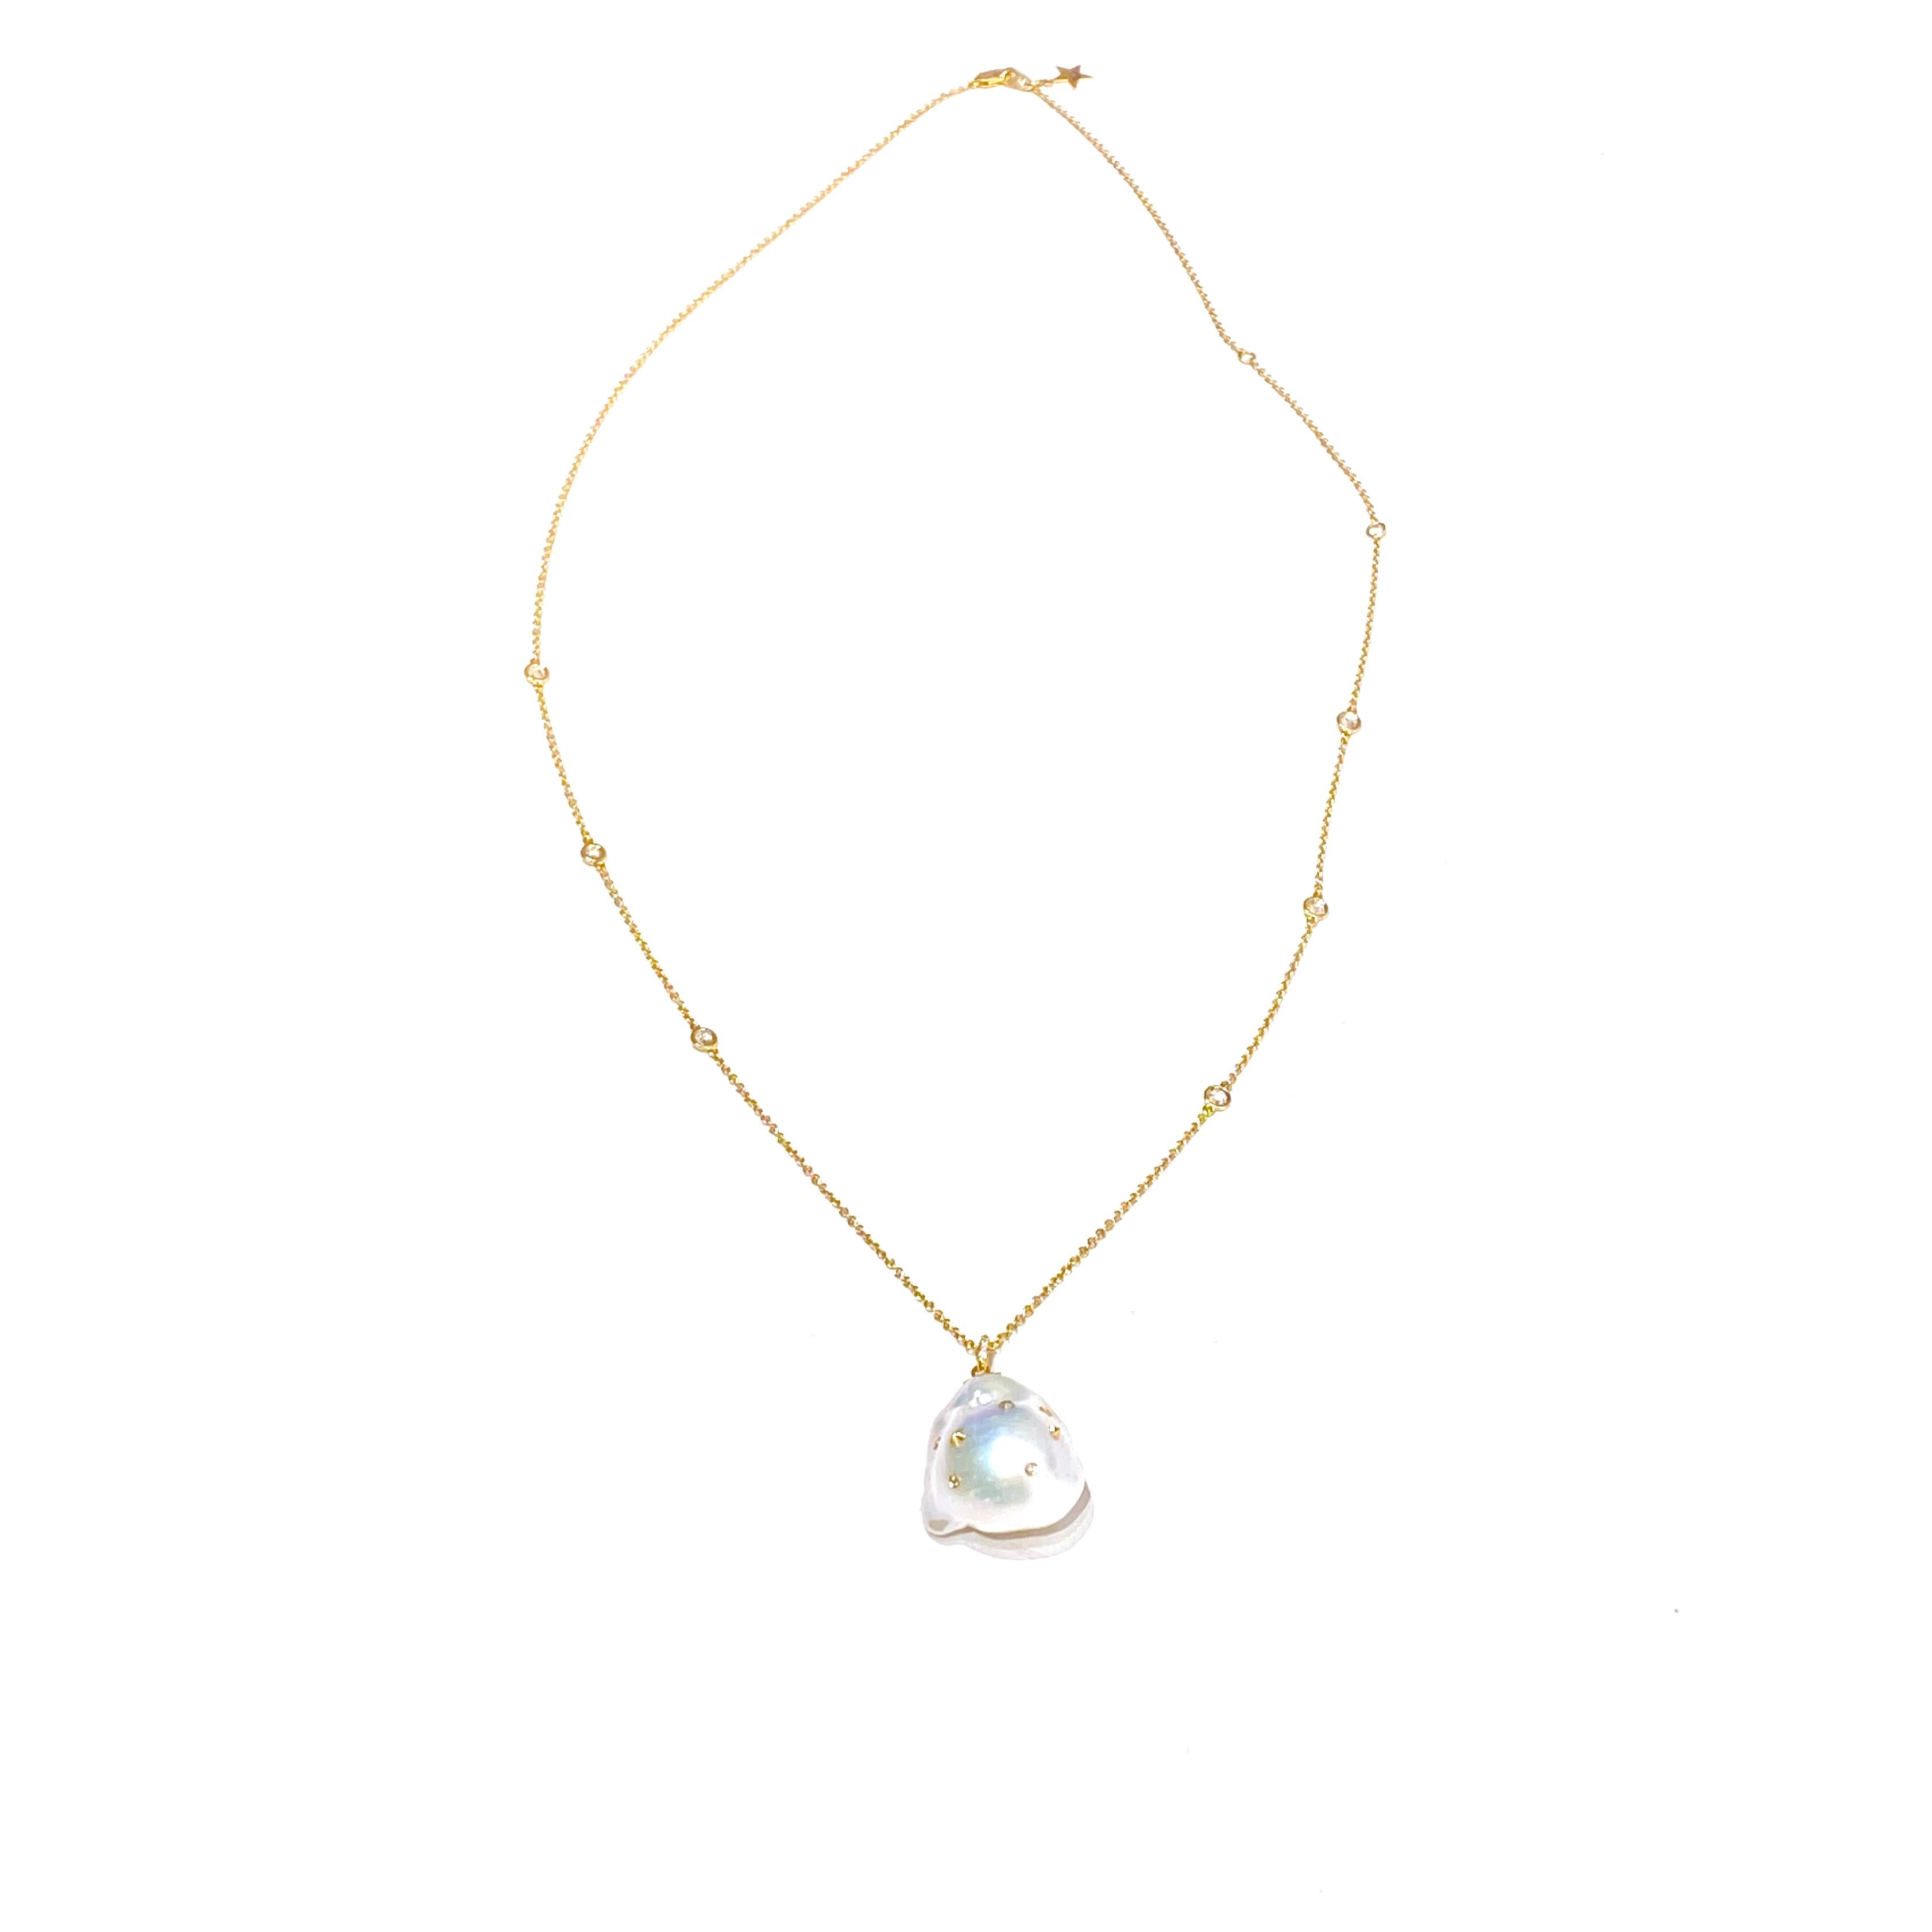 Inspired by the beauty of imperfection, Bibi van der Velden sculpts exotic materials into one-of-a-kind jewelry evoking her respect for our natural world.

This necklace features a stunning baroque pearl with a white, rose-cut diamond pendant and a